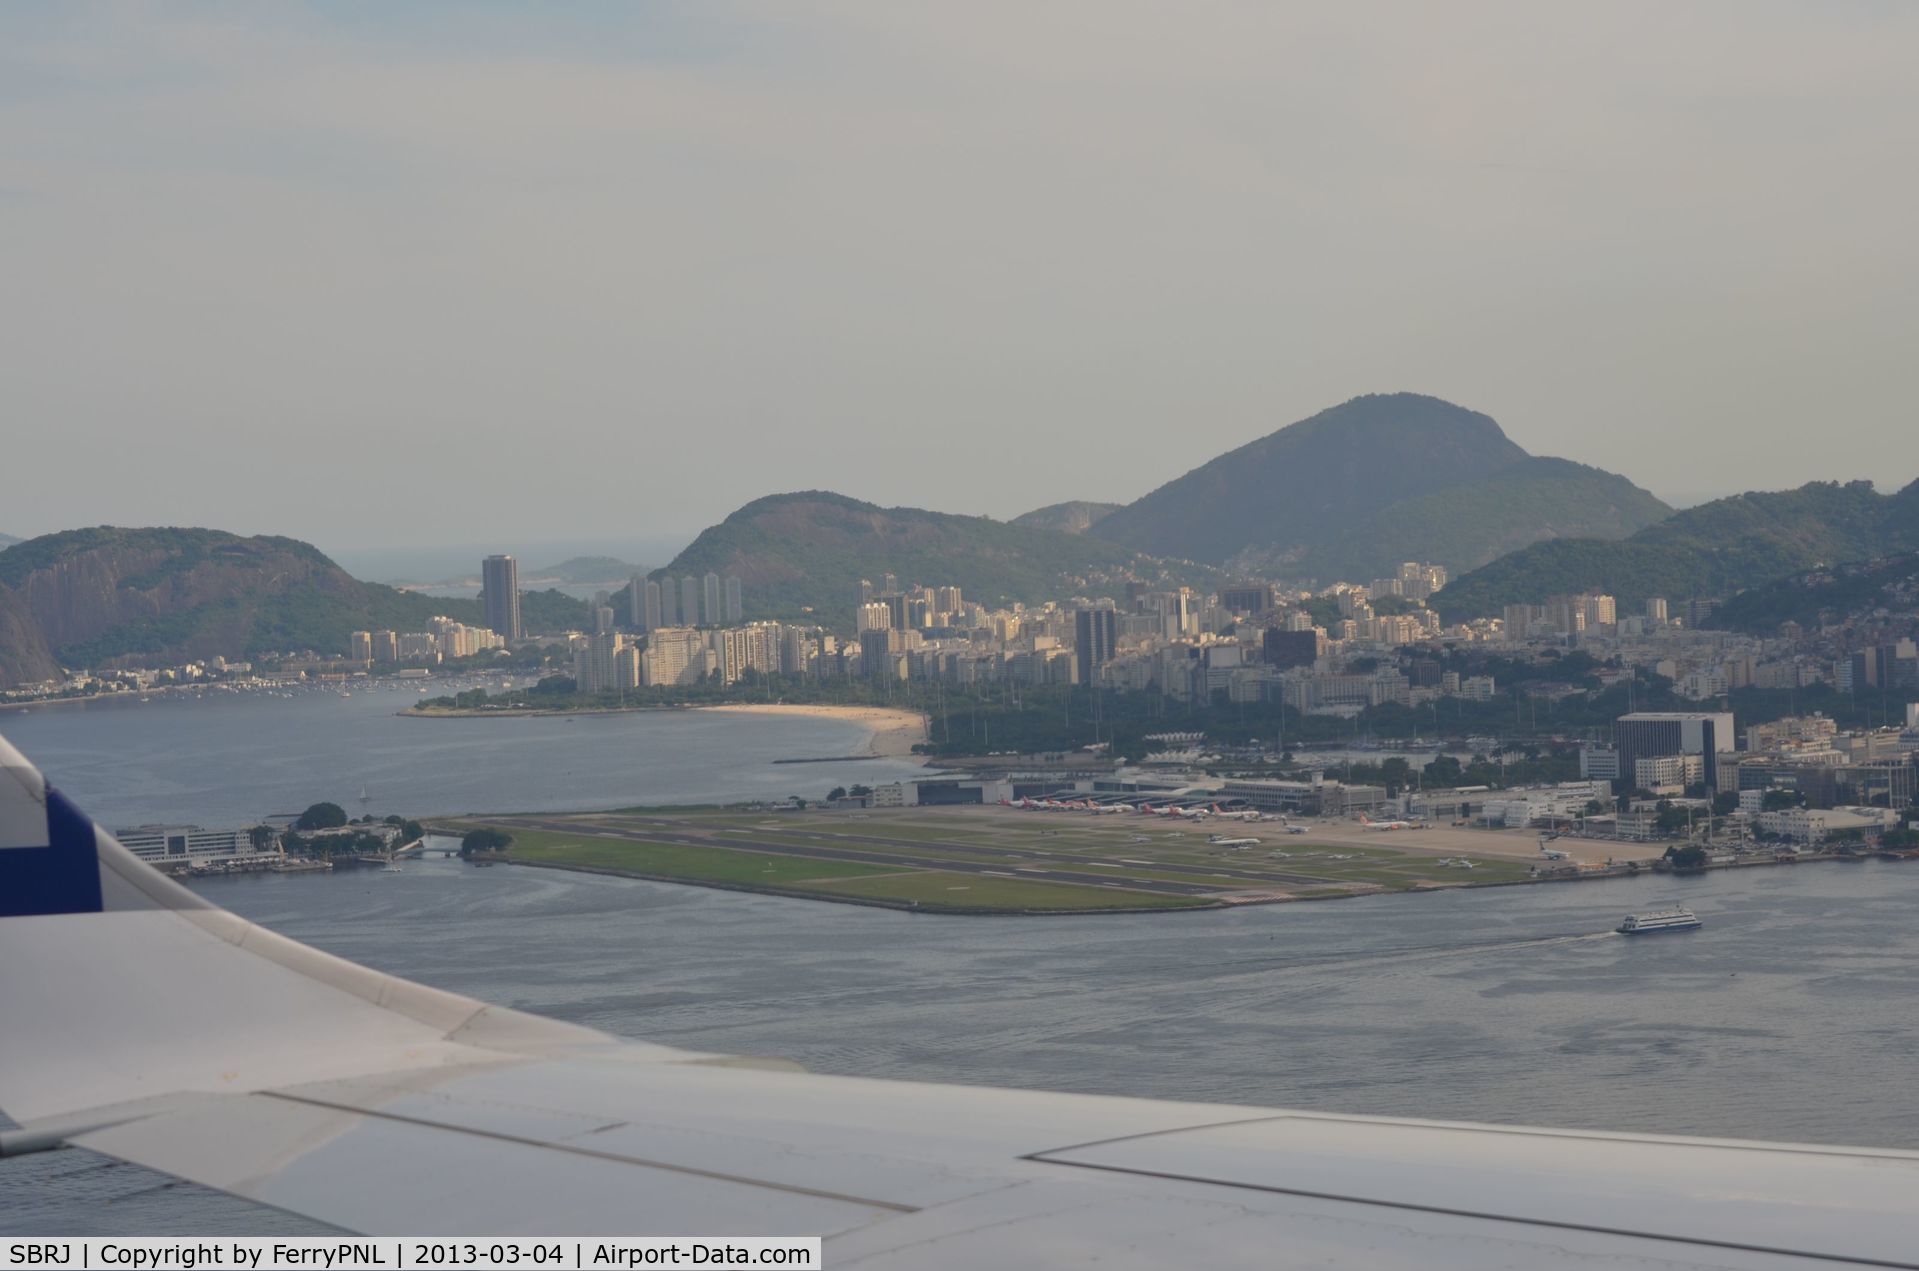 Santos Dumont Regional Airport, Rio de Janeiro, Rio de Janeiro Brazil (SBRJ) - Santos Dumont Airport, Rio de Janairo viewed from Trip ERJ190 after a 270 degree turn over the airport in preparation for landing.